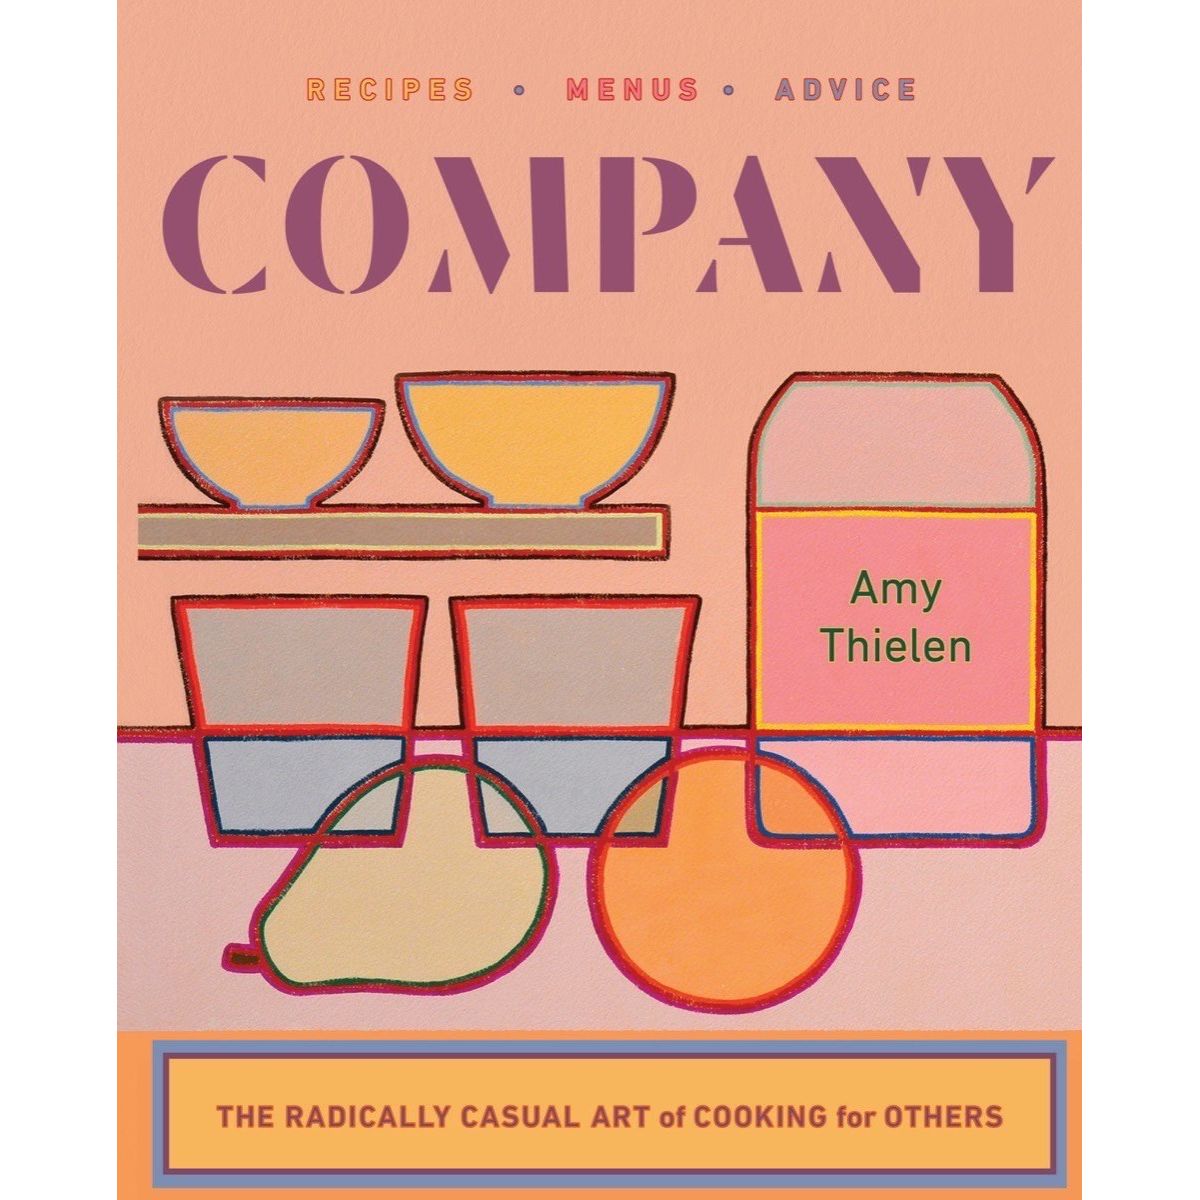 Company: The Radically Casual Art of Cooking for Others (Amy Thielen)